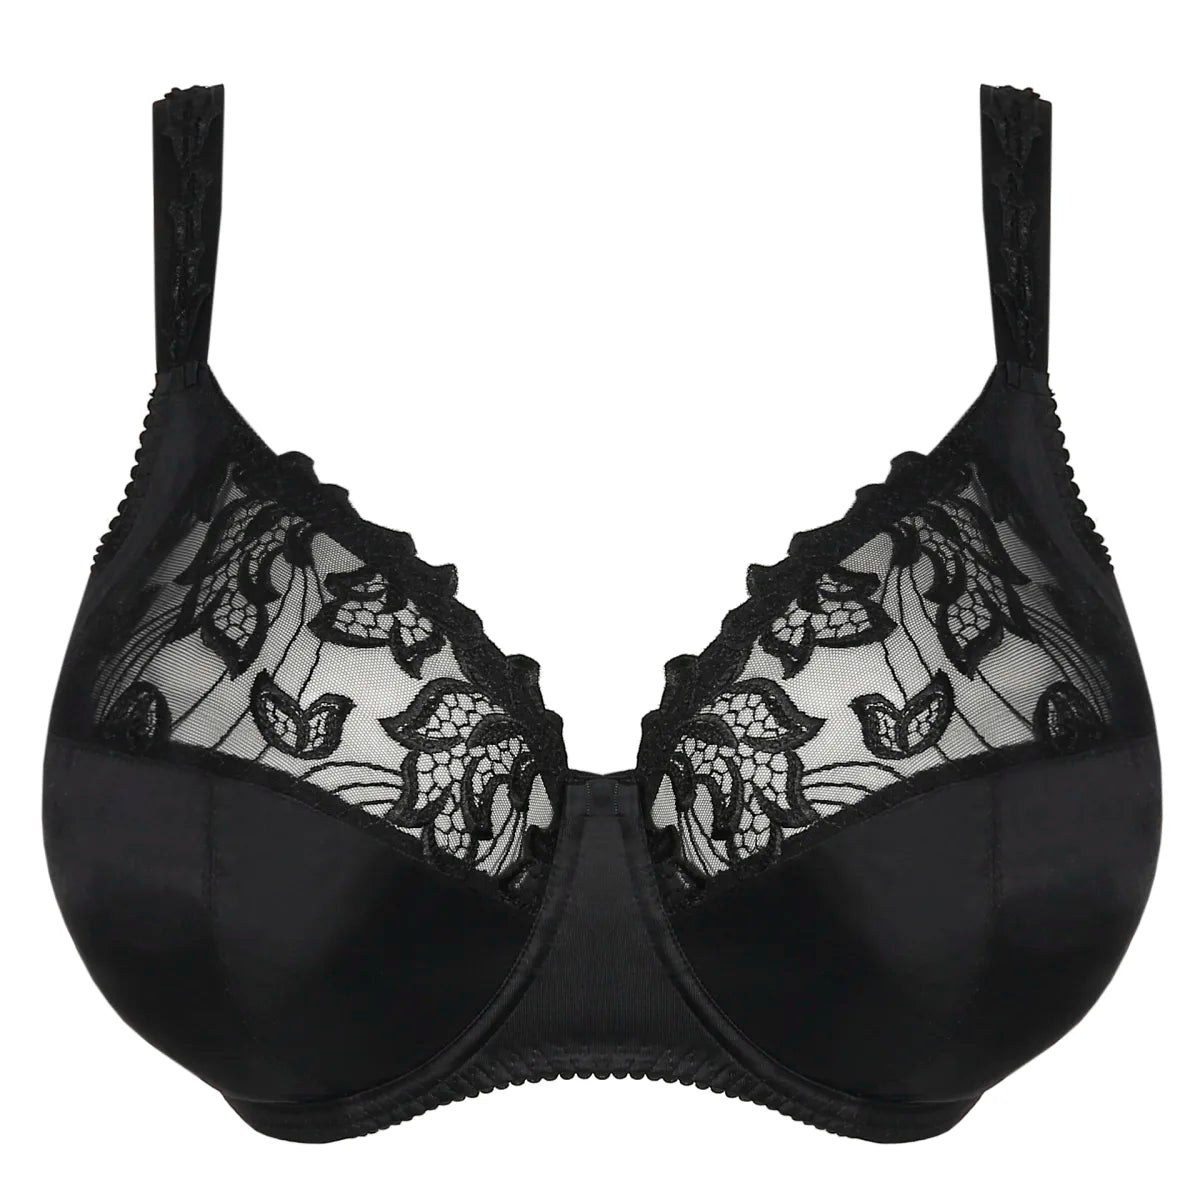 Prima Donna Deauville Full Cup Bra (Cup Sizes I,J)